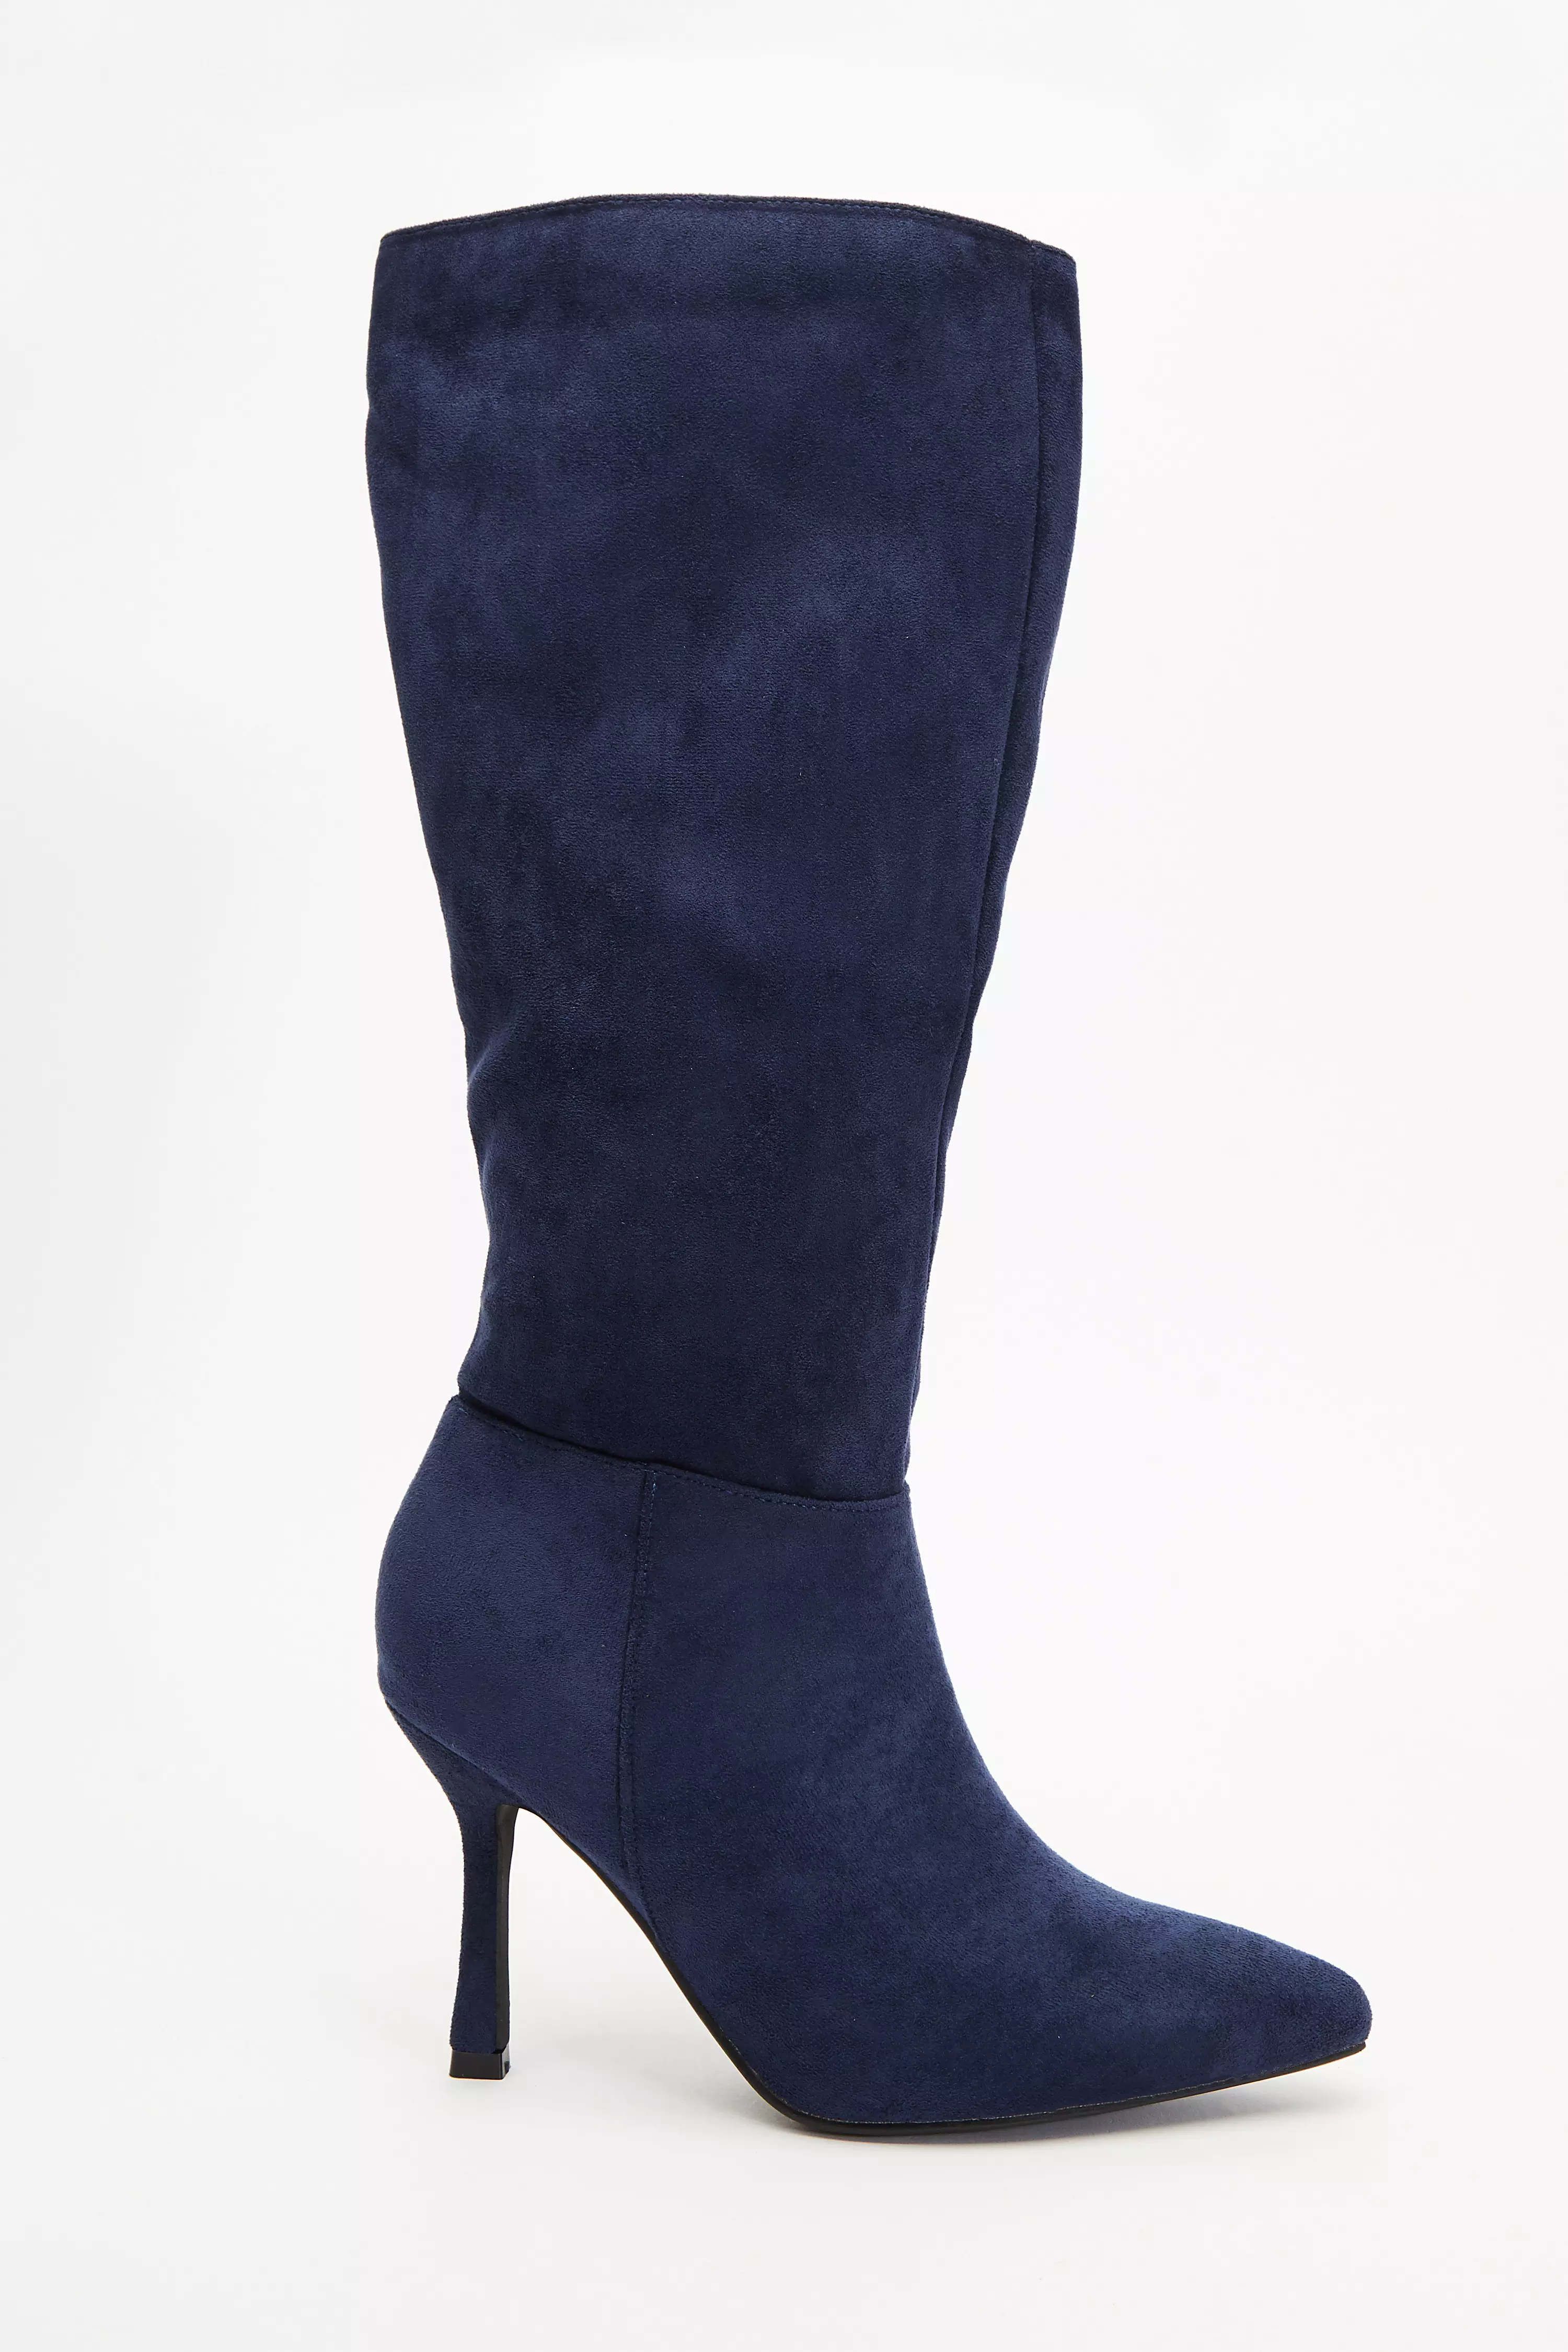 Navy Faux Suede Knee High Heeled Boots